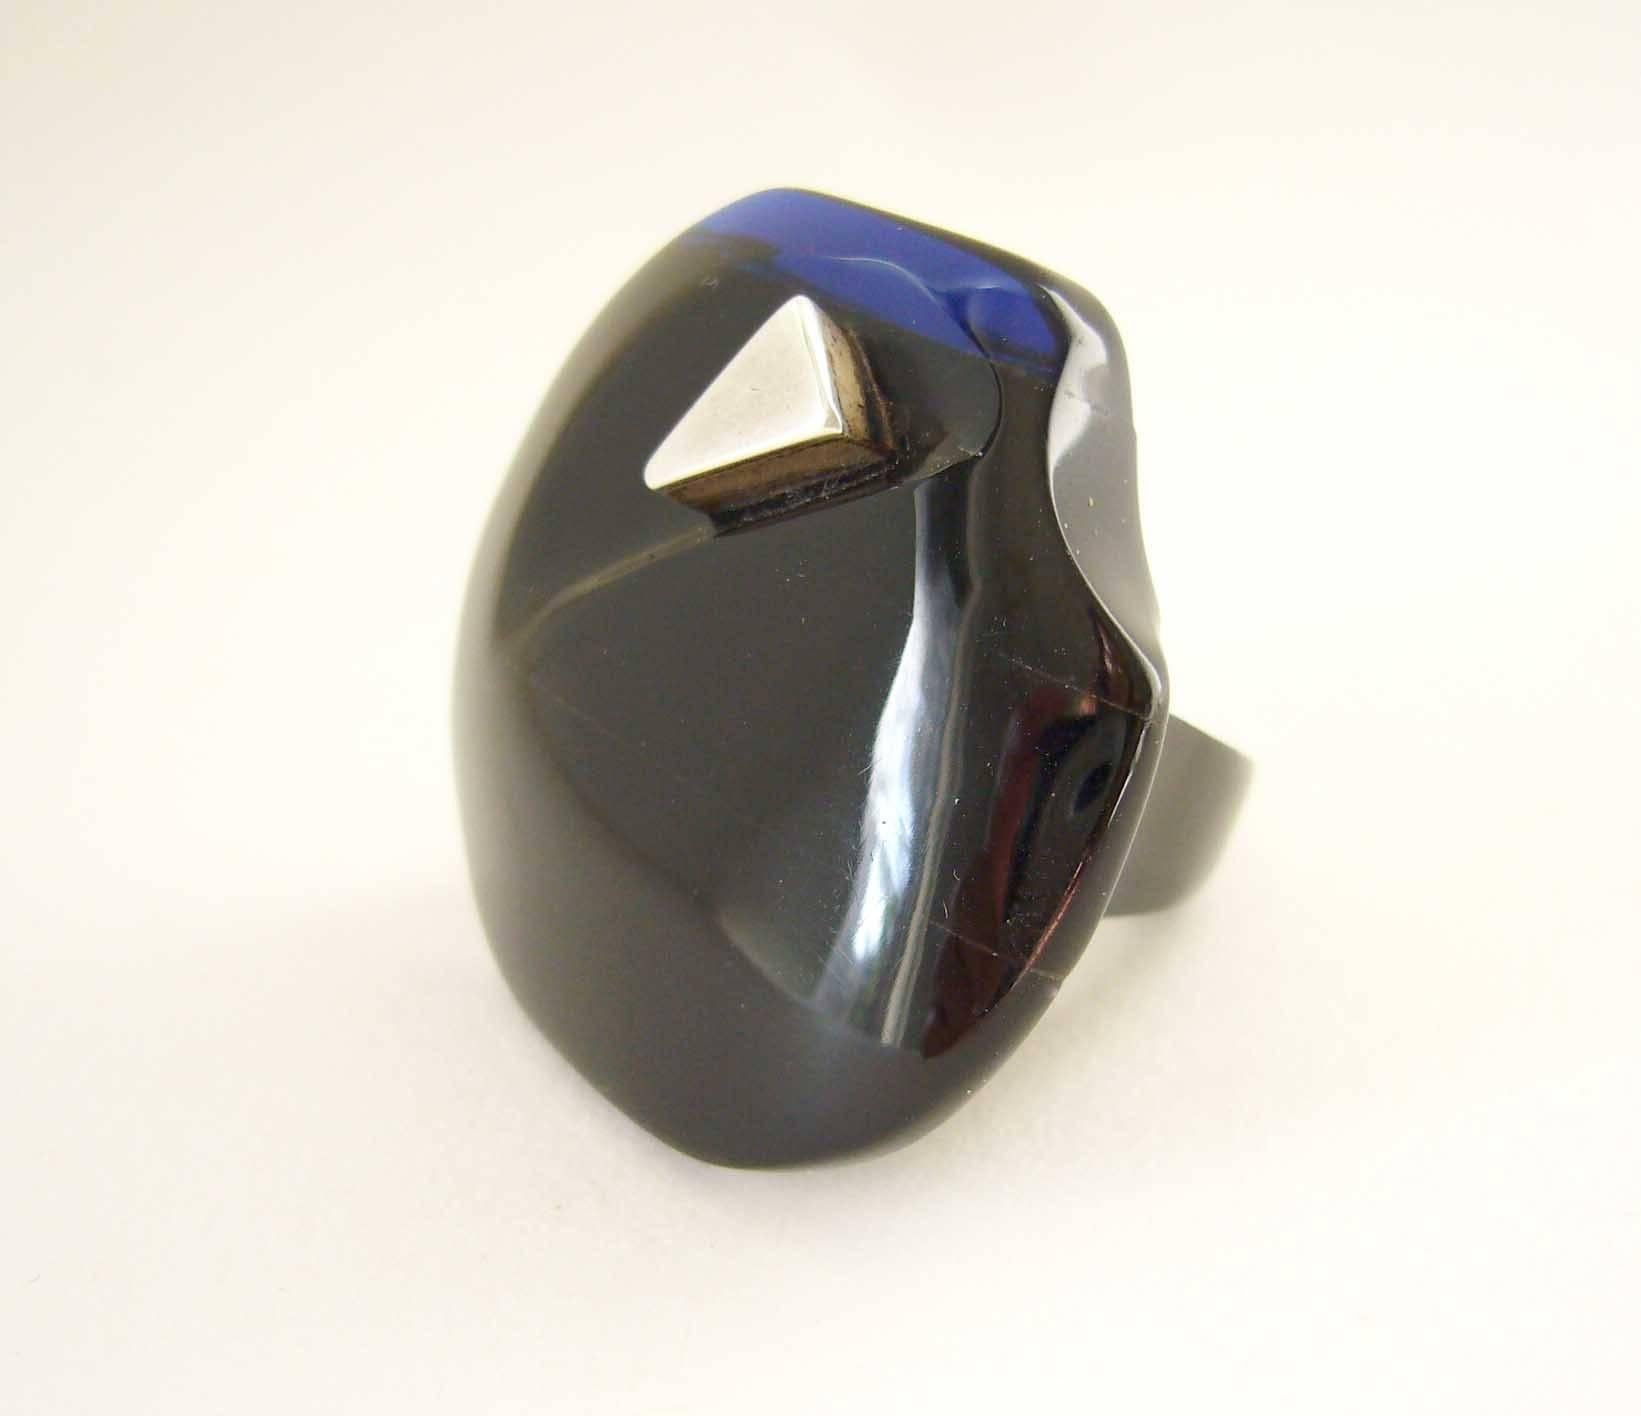 Layered blue and black acrylic with sterling silver triangular inlay created by Suzanne Somogy of Paris, France circa 1970's.  Light in weight and of good scale, the face measures about 1.5